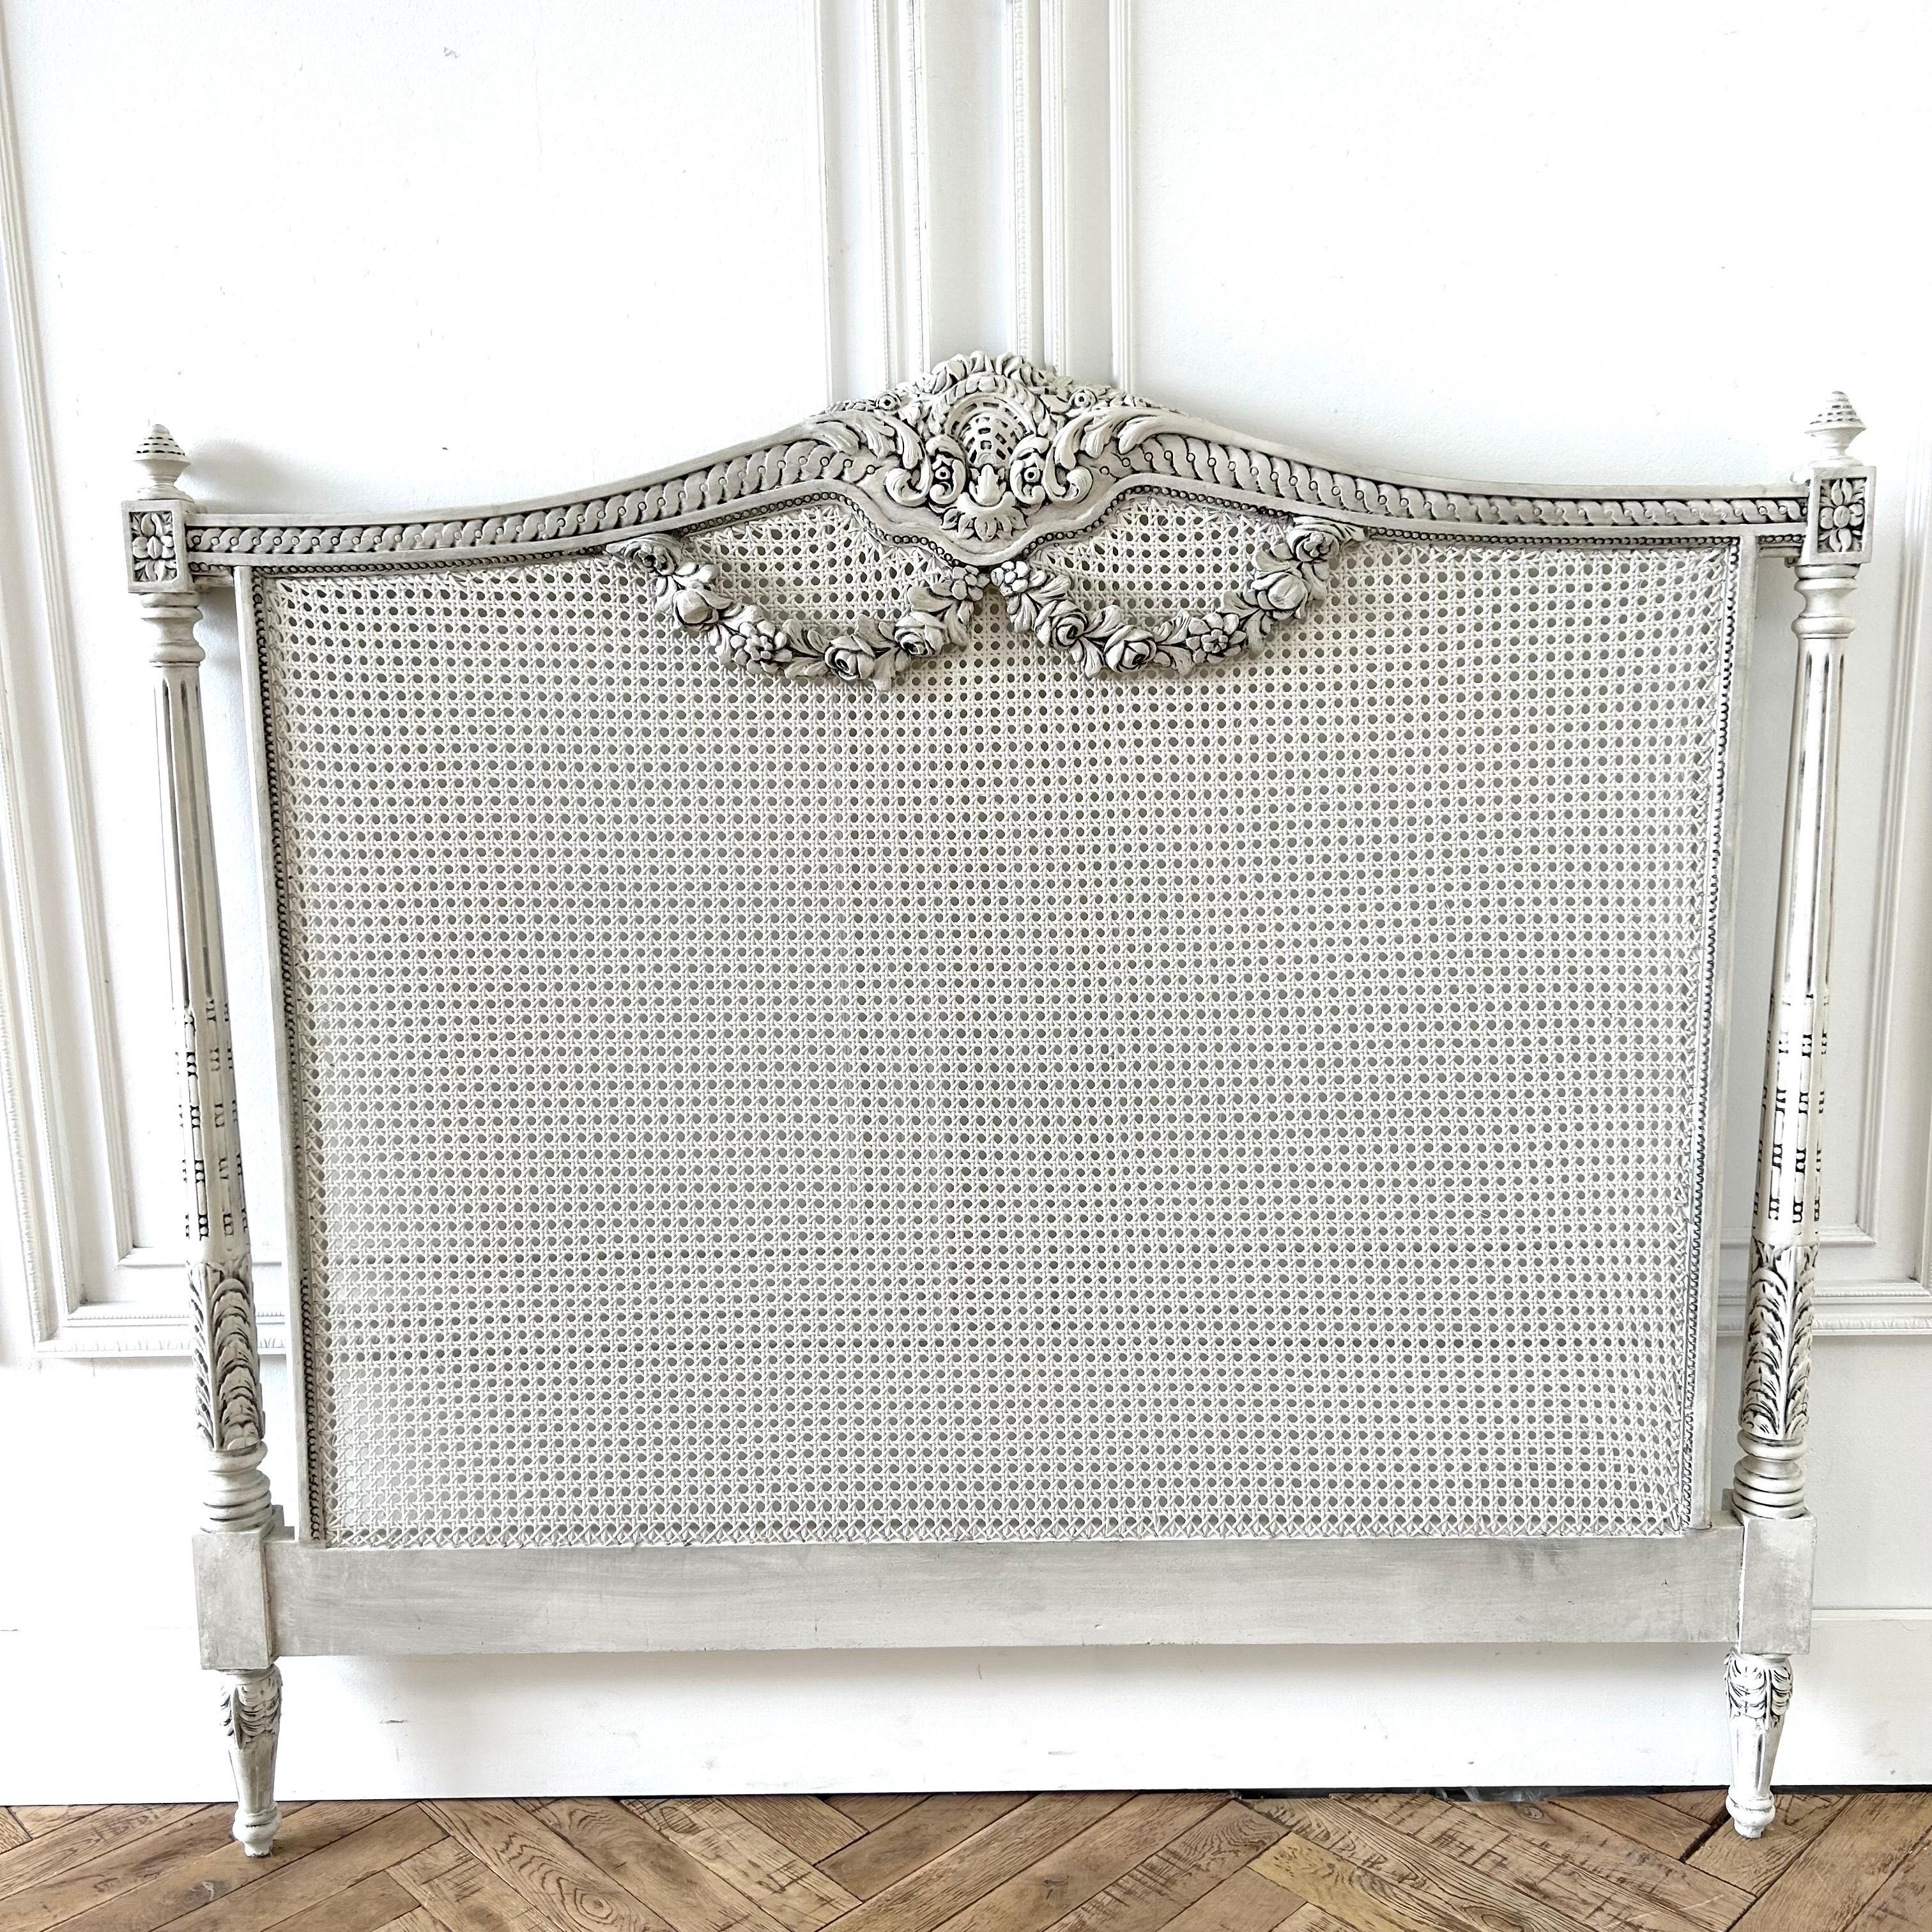 Painted French Country Queen headboard with cane and rose swag carvings.
Painted in a soft off-white oyster color, with subtle distressed edges, antique glazed patina.

Size: 61” W x 3” D x 57” H.